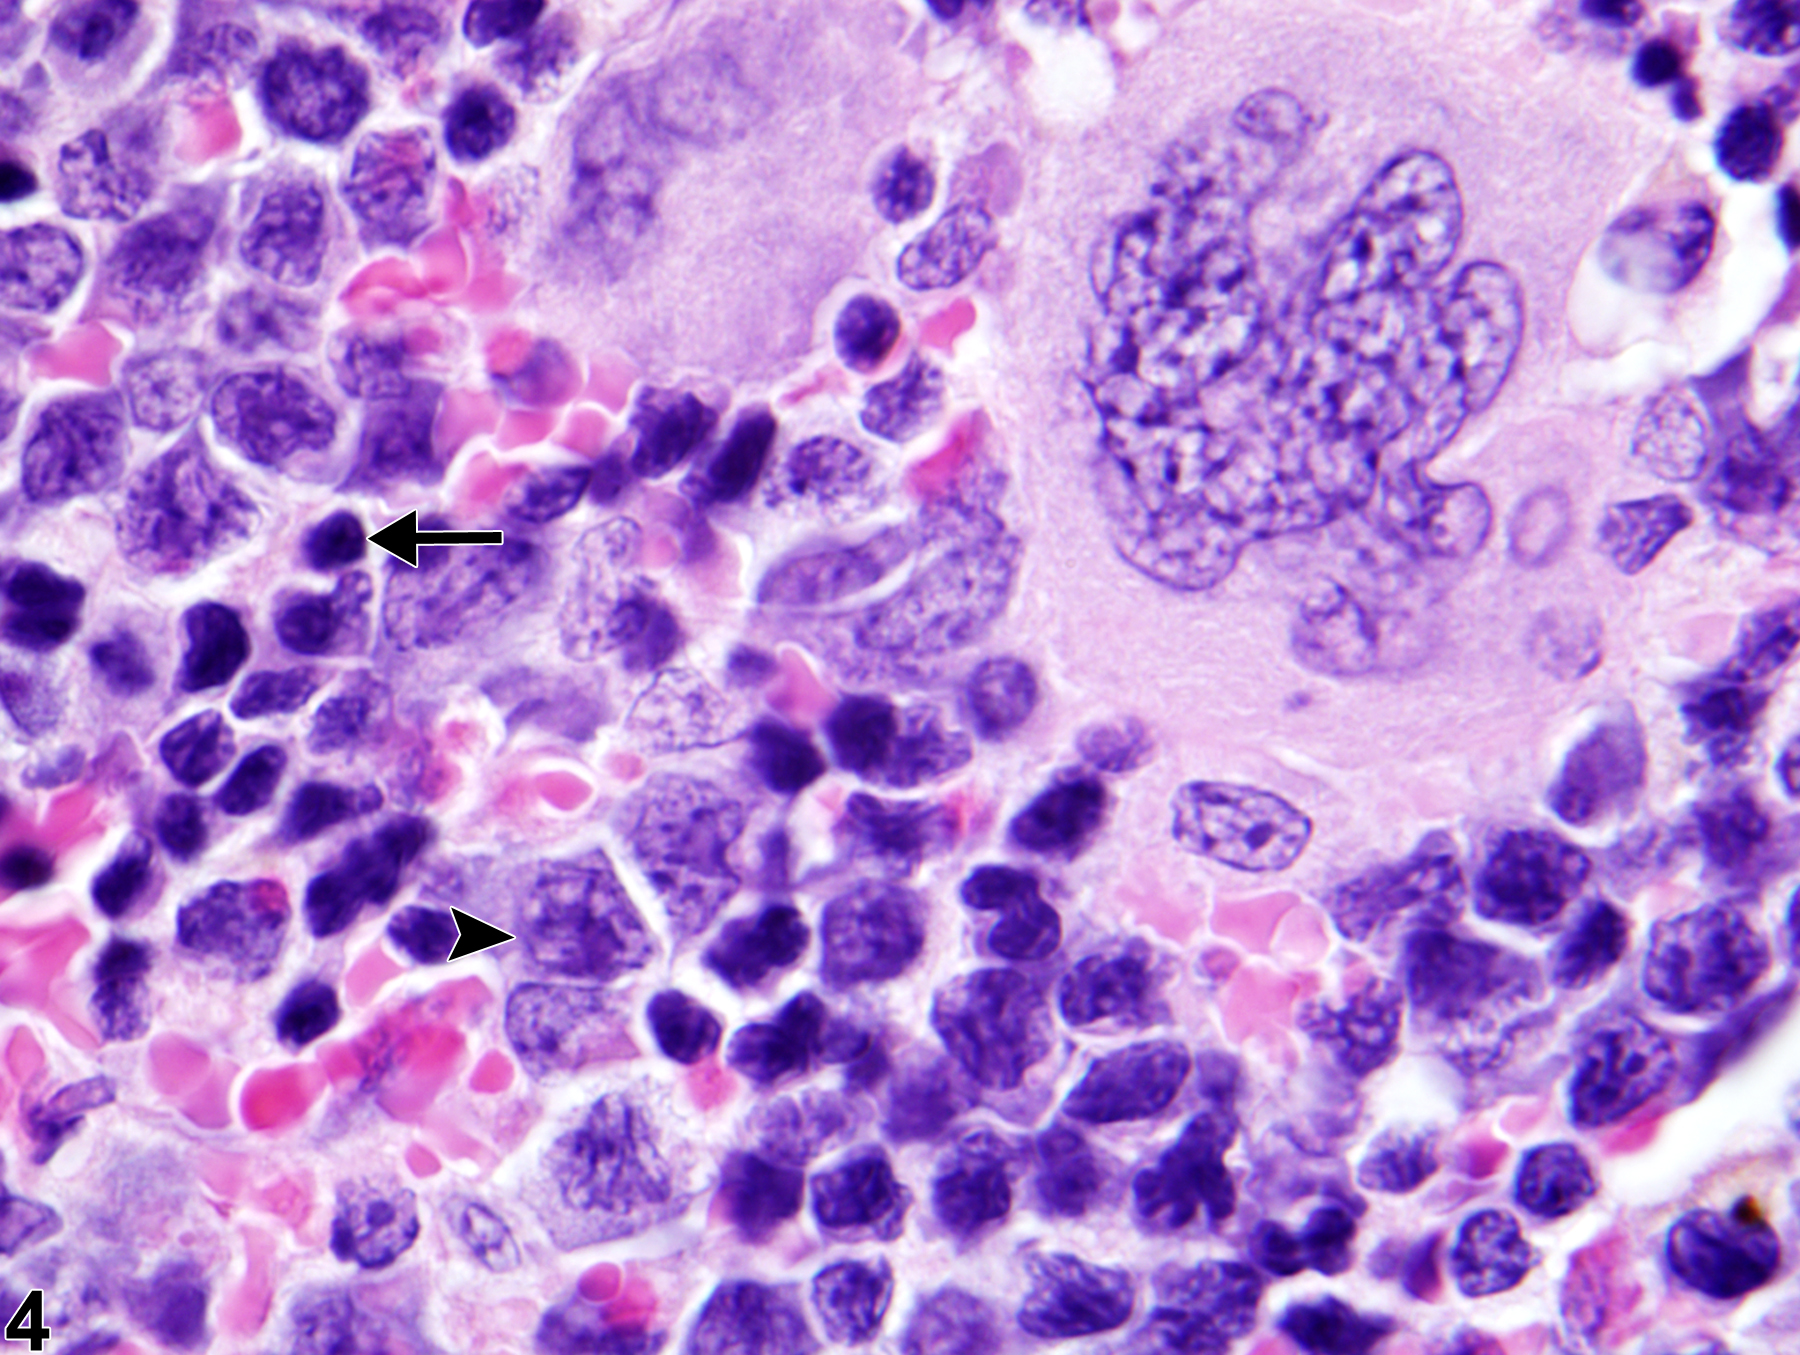 Image of extramedullary hematopoiesis in the spleen from a male B6C3F1/N mouse in a chronic study